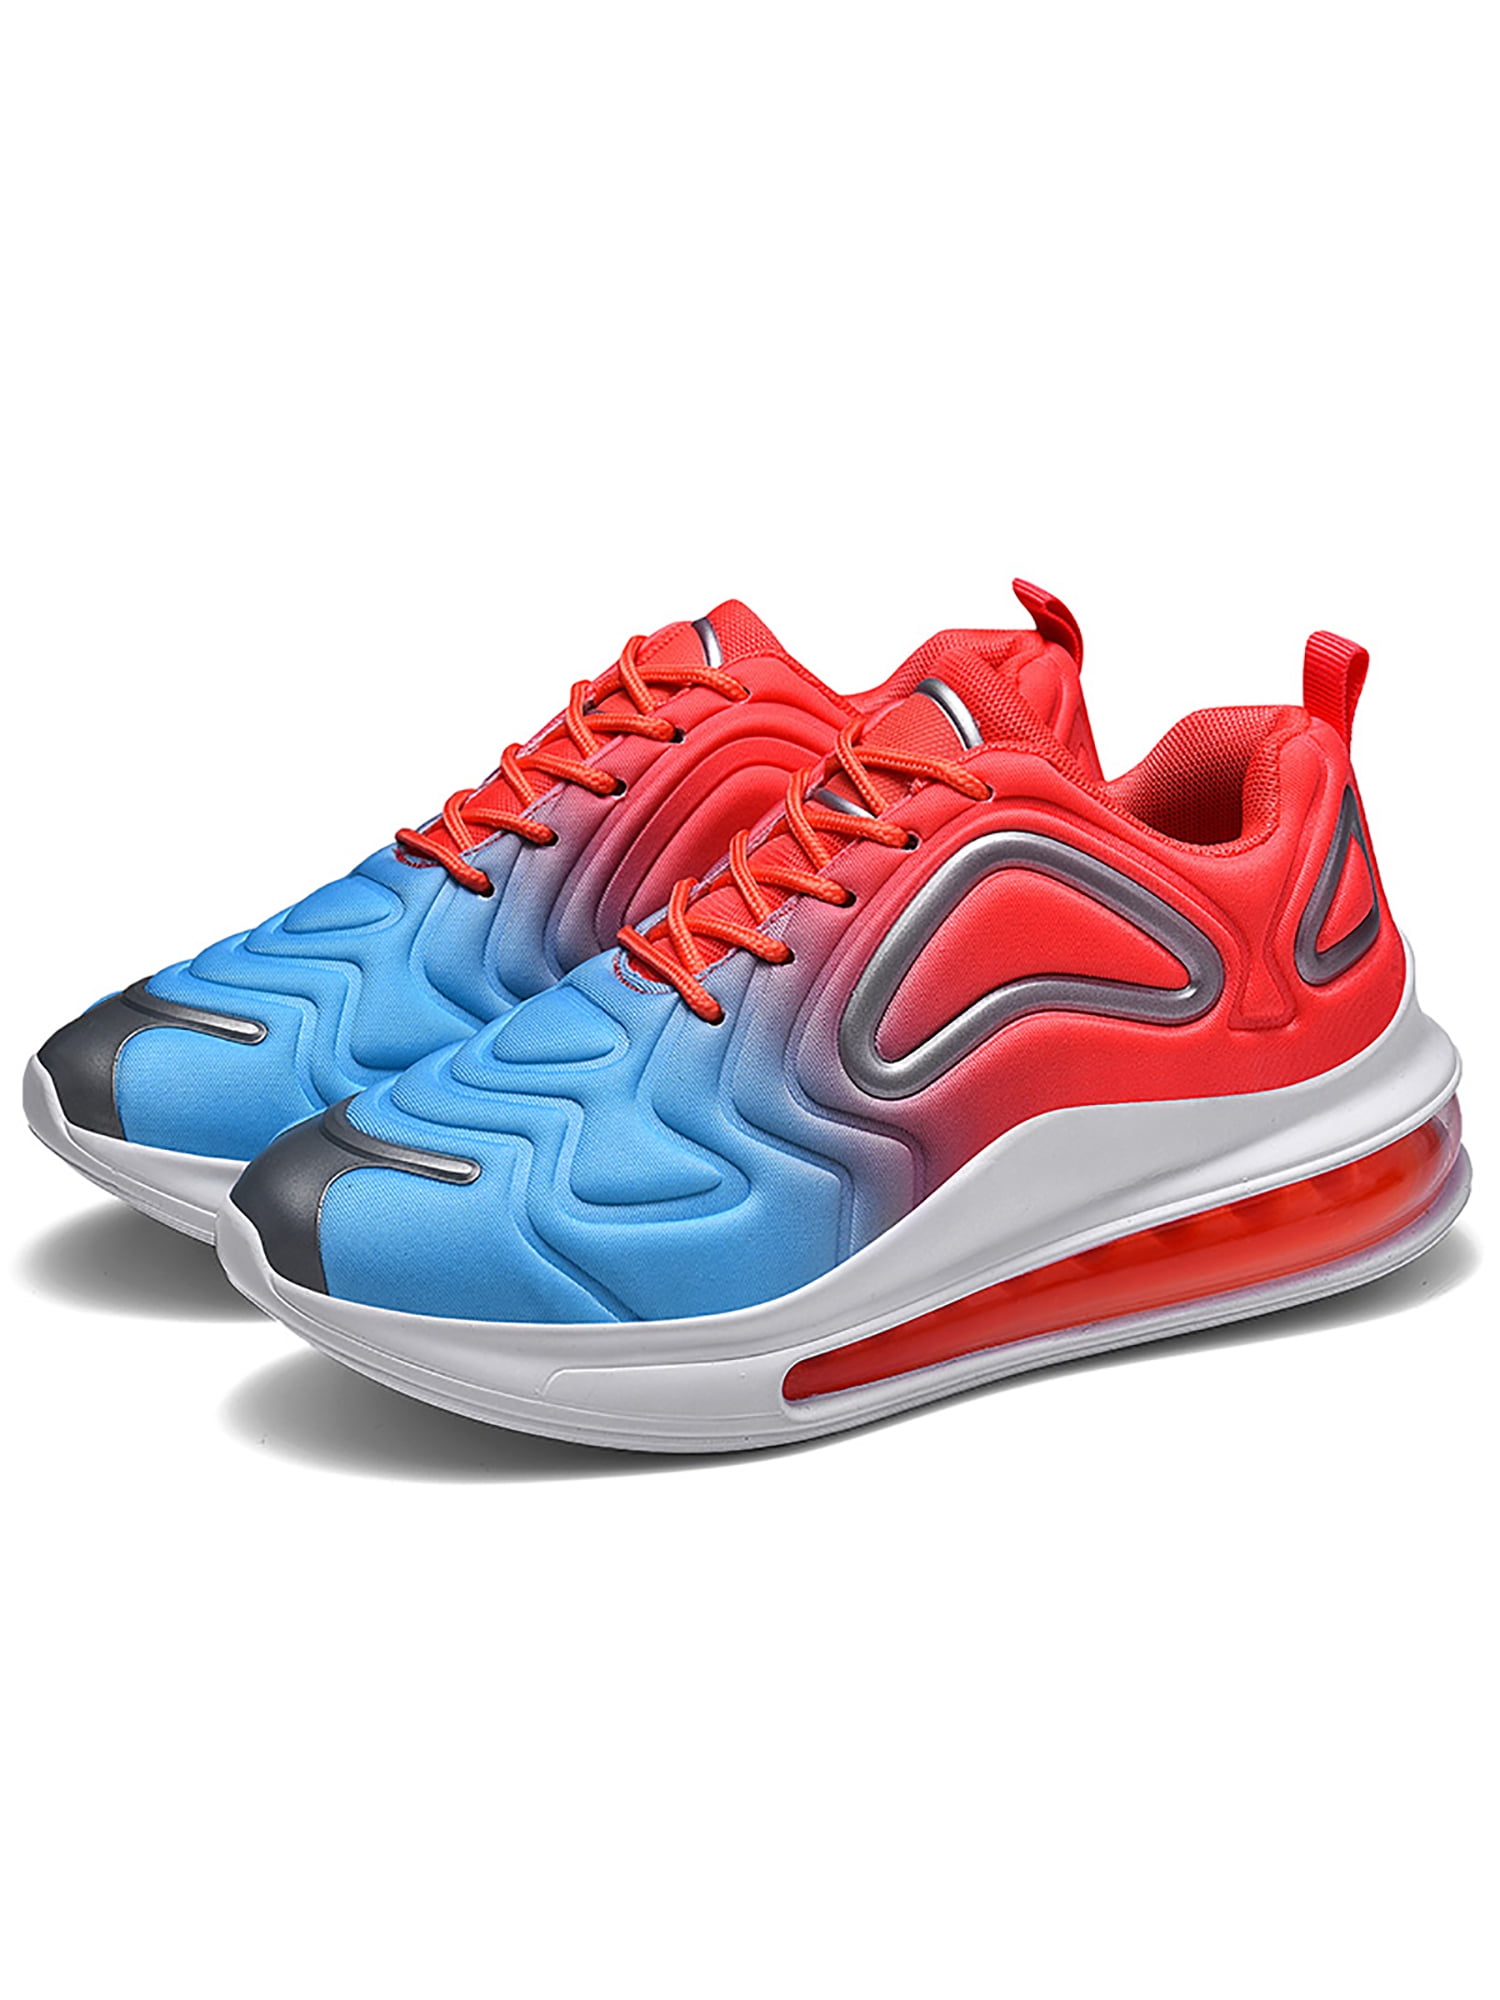 mens colorful running shoes